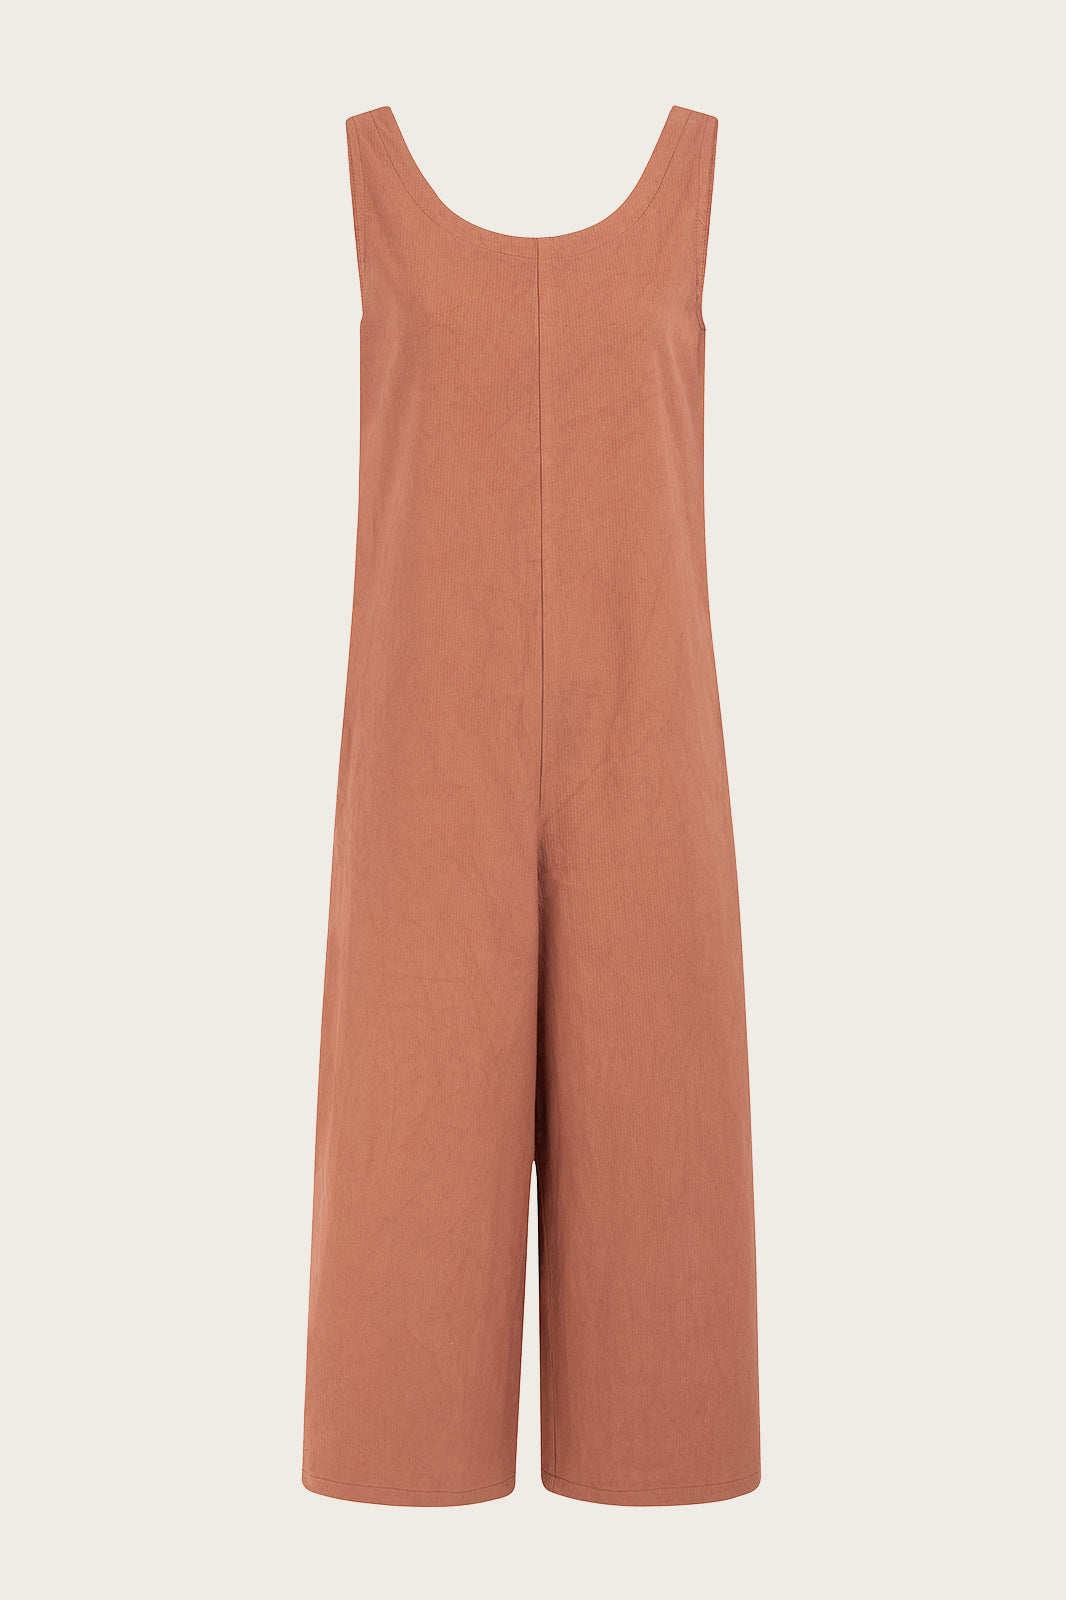 Naz women's jumpsuit in peach. Features a straight fit hidden pockets and deep back v-neckline.